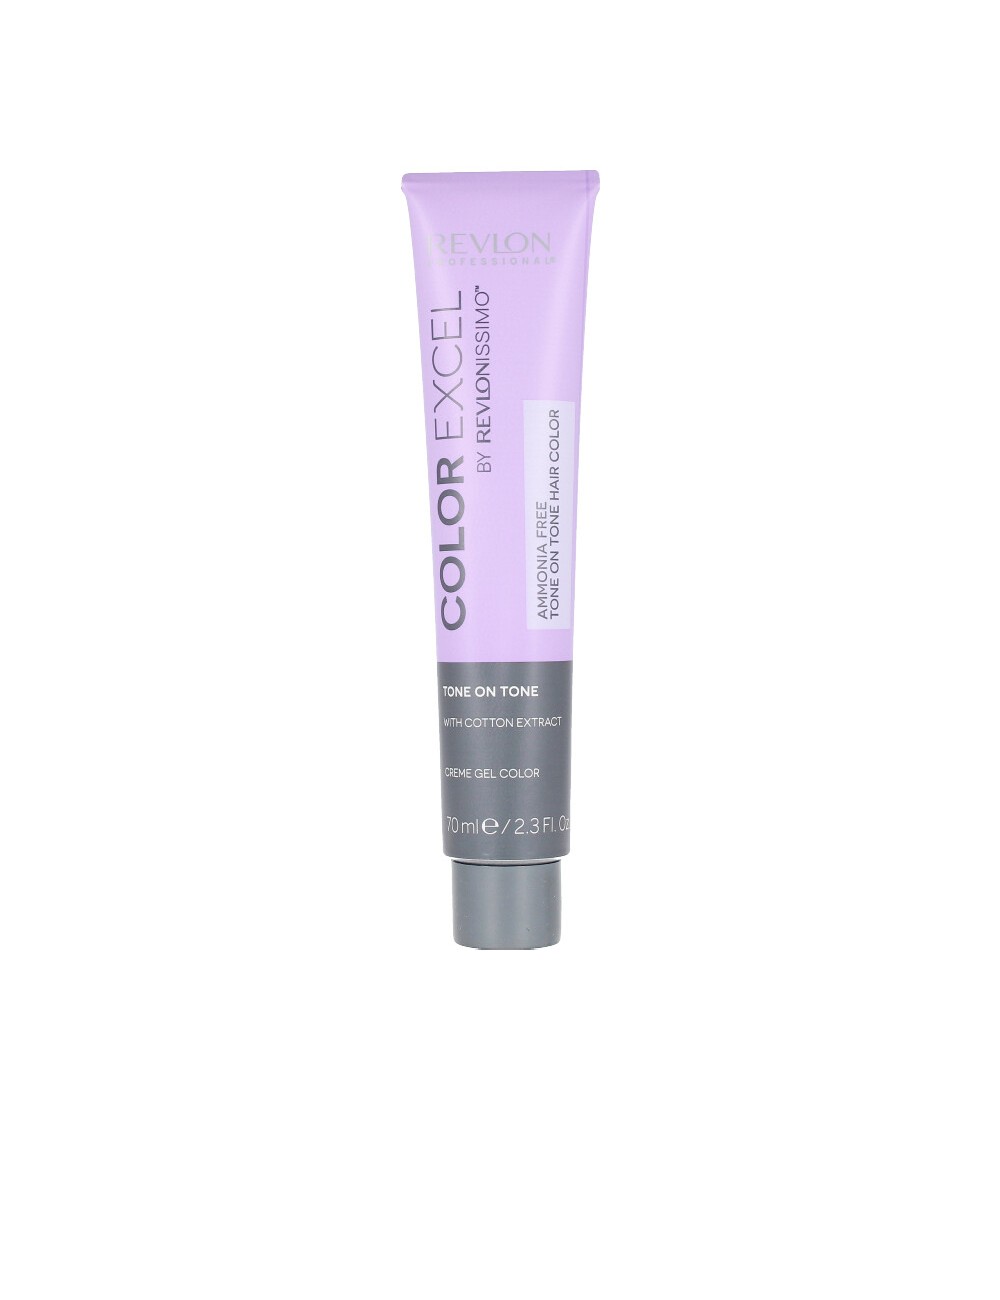 YOUNG COLOR EXCEL creme gel color 70ml